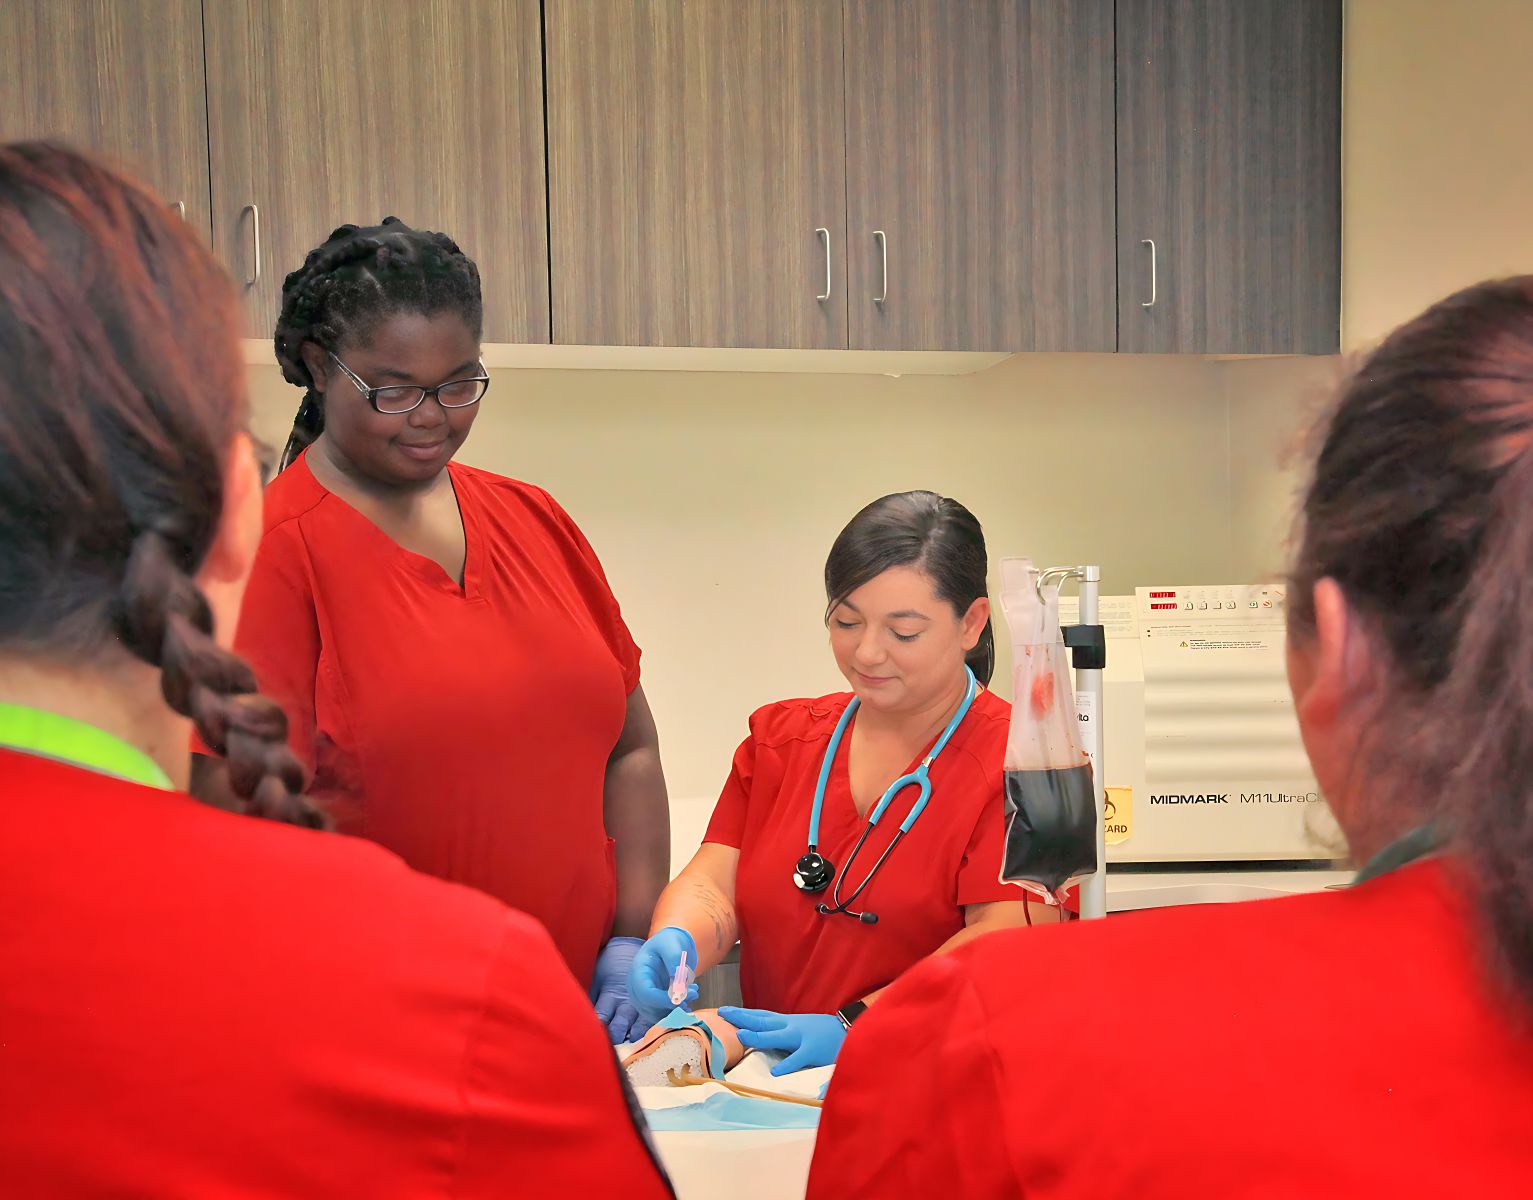 Medical Assisting Program at OTC Ranked #3 in State by MedicalAssistantAdvice.com.